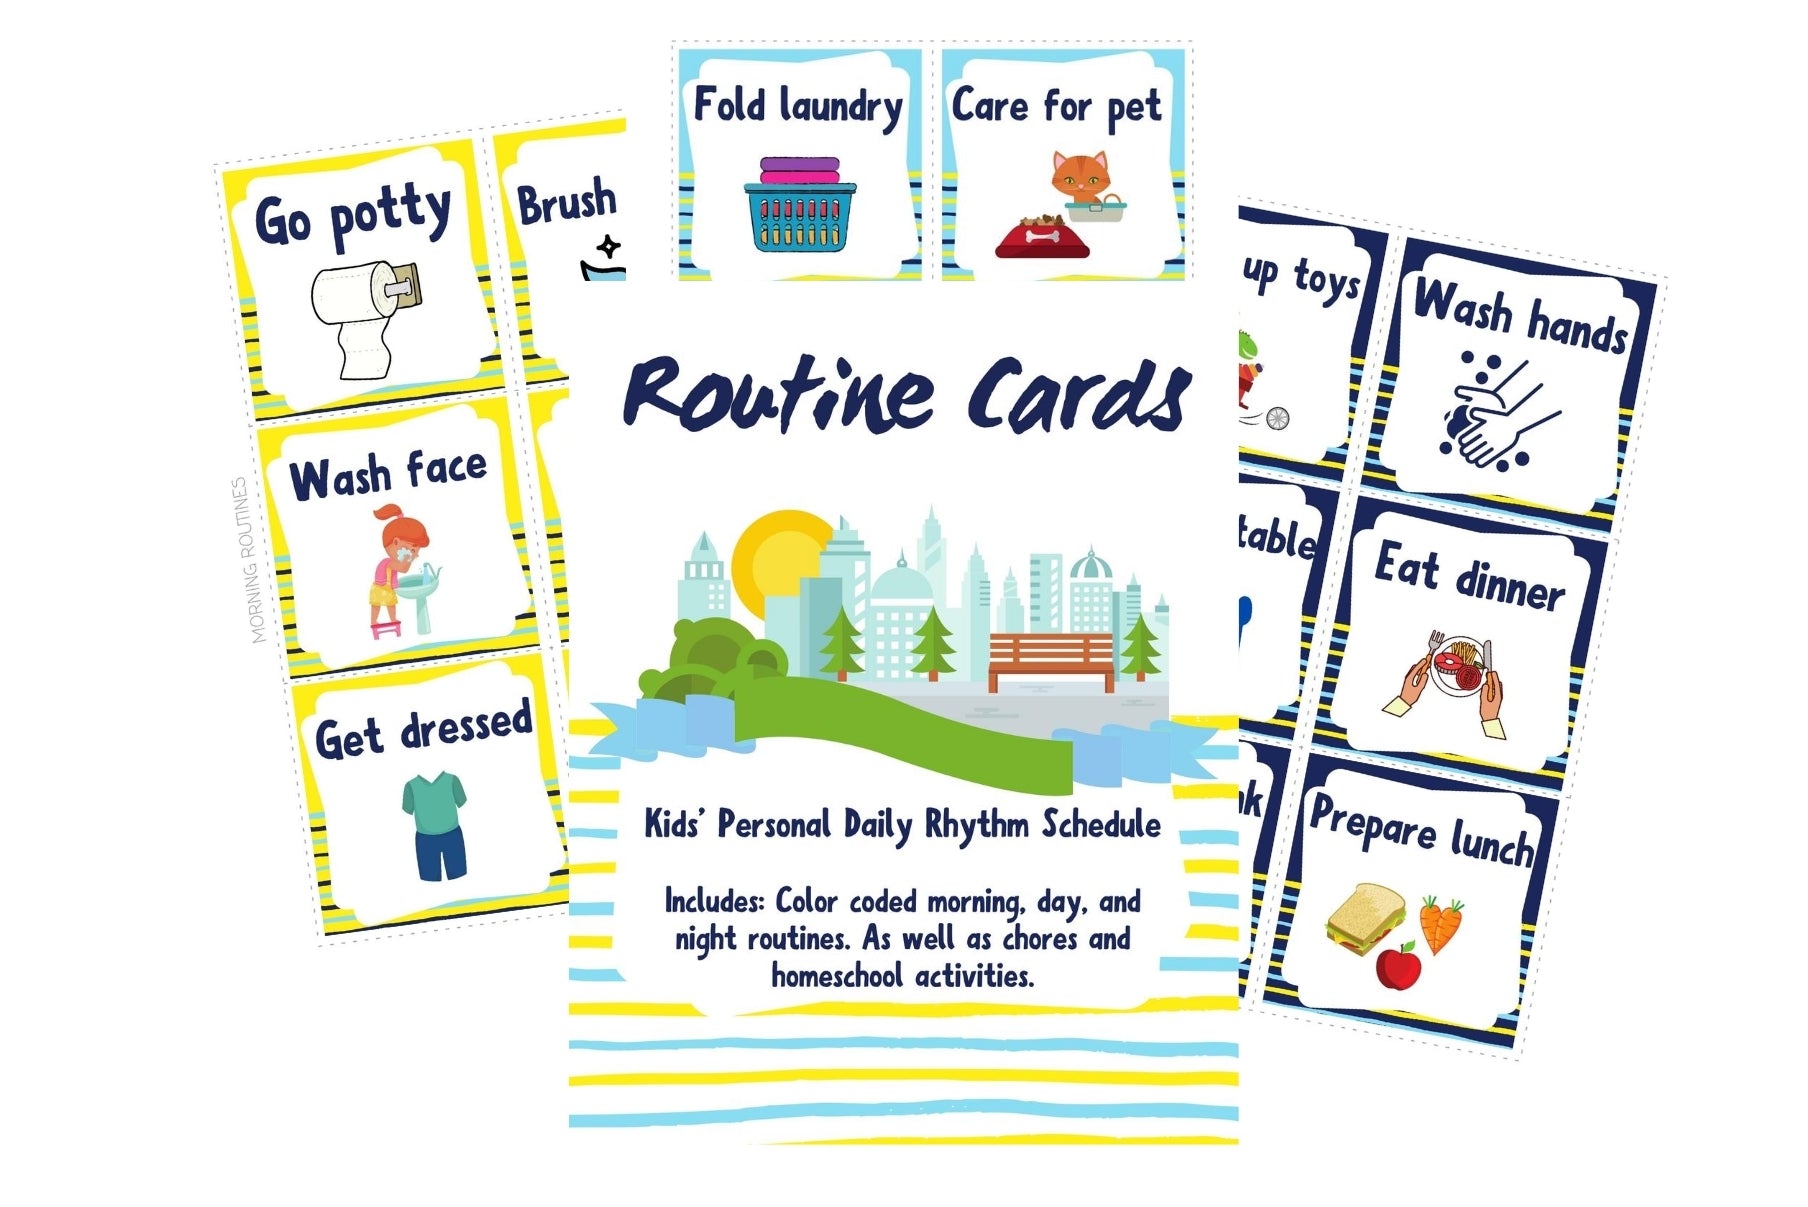 daily routine picture cards